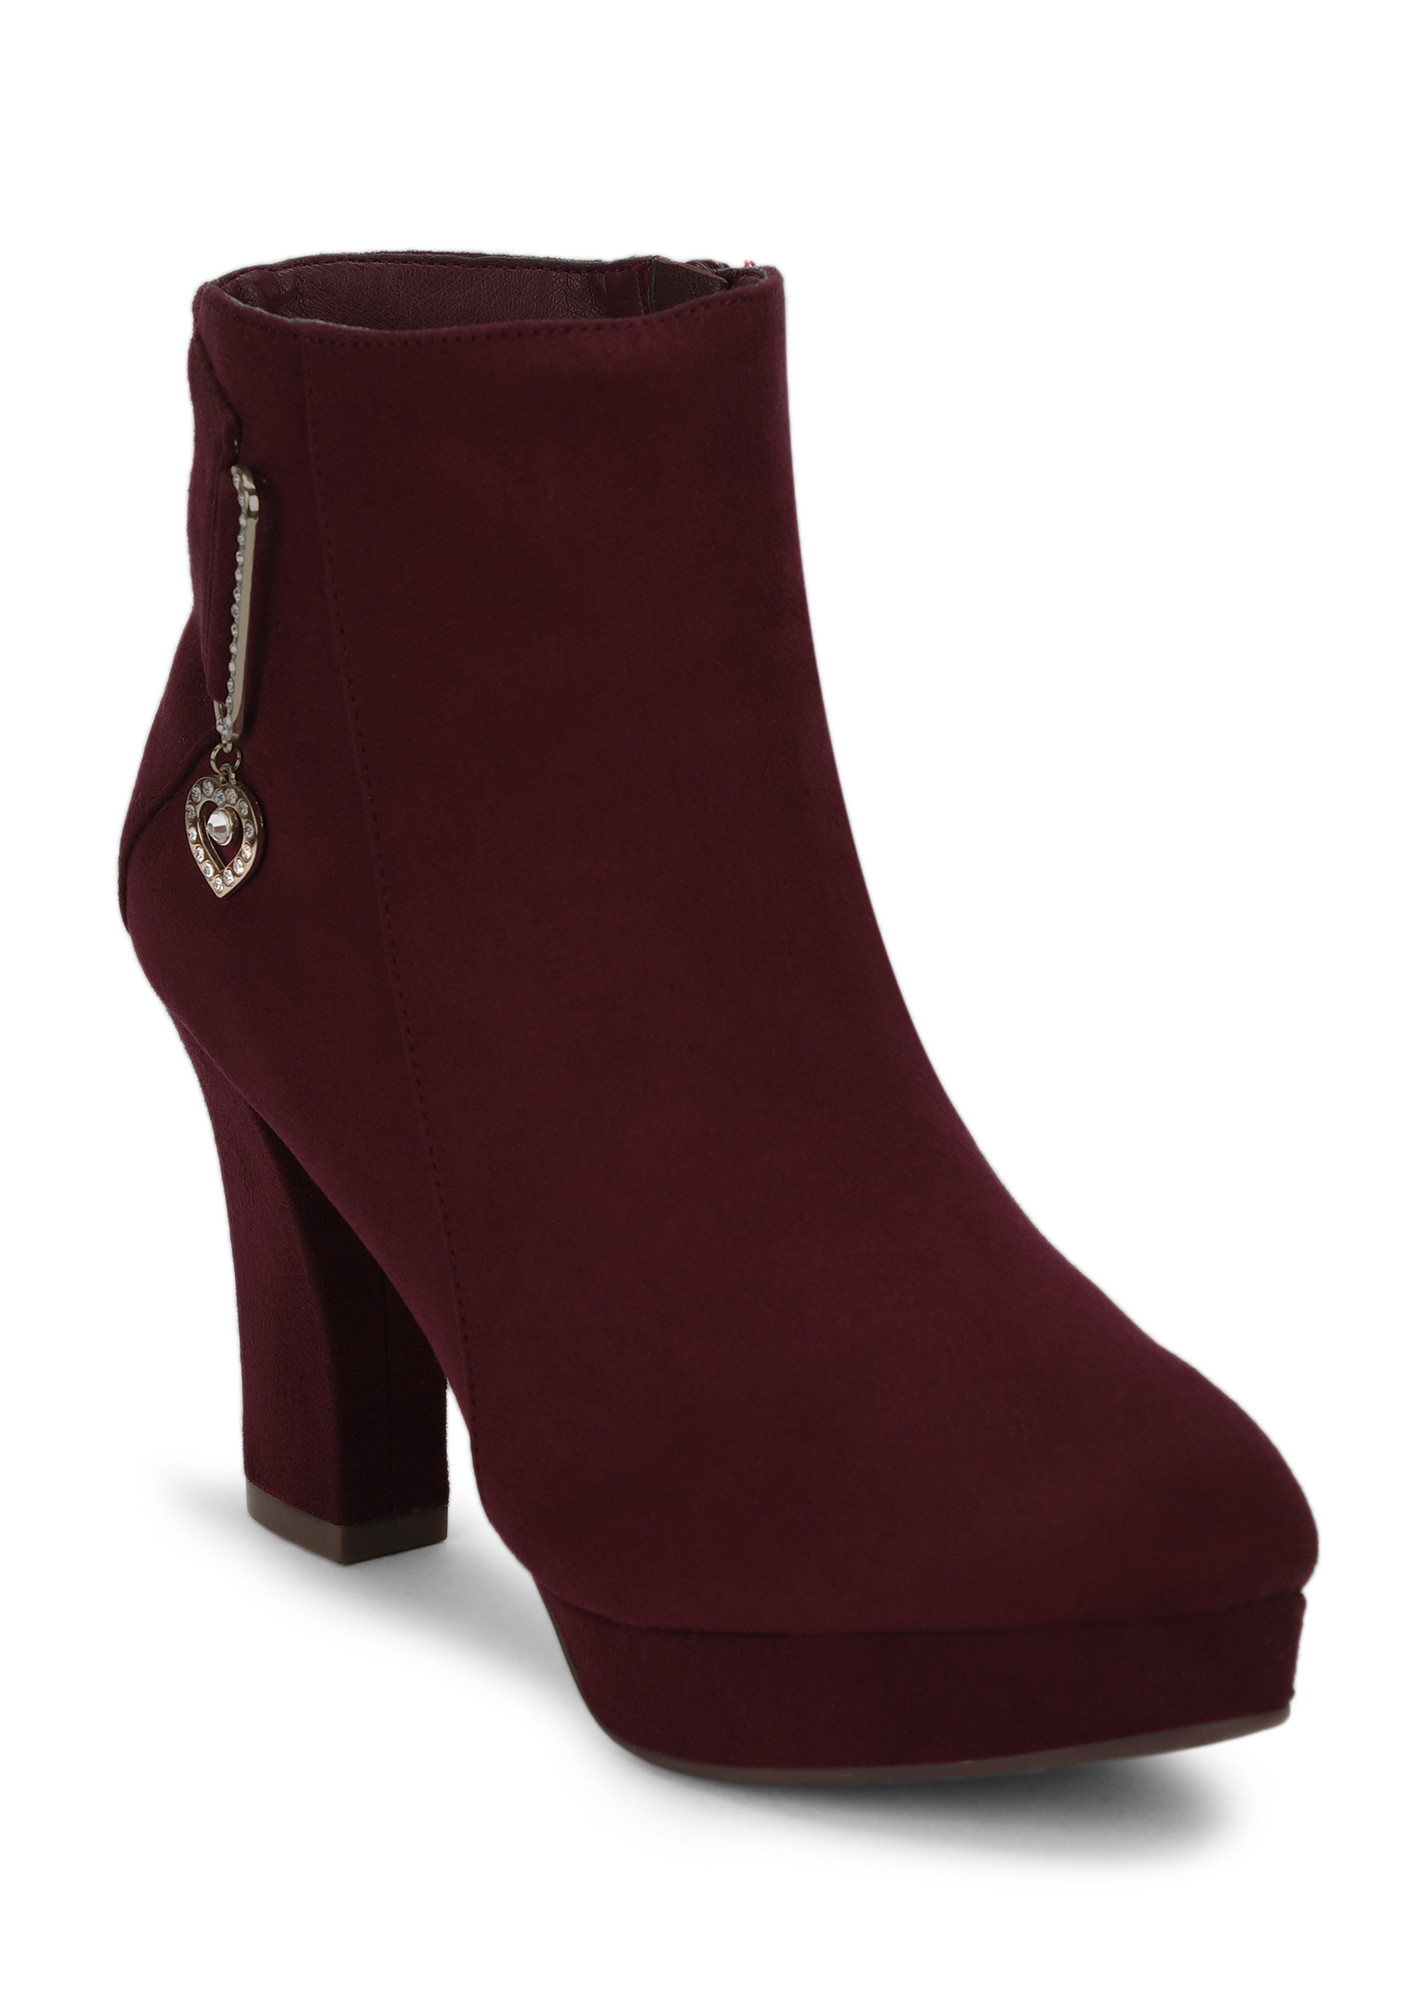 STUD MY HEART WINE ANKLE BOOTS